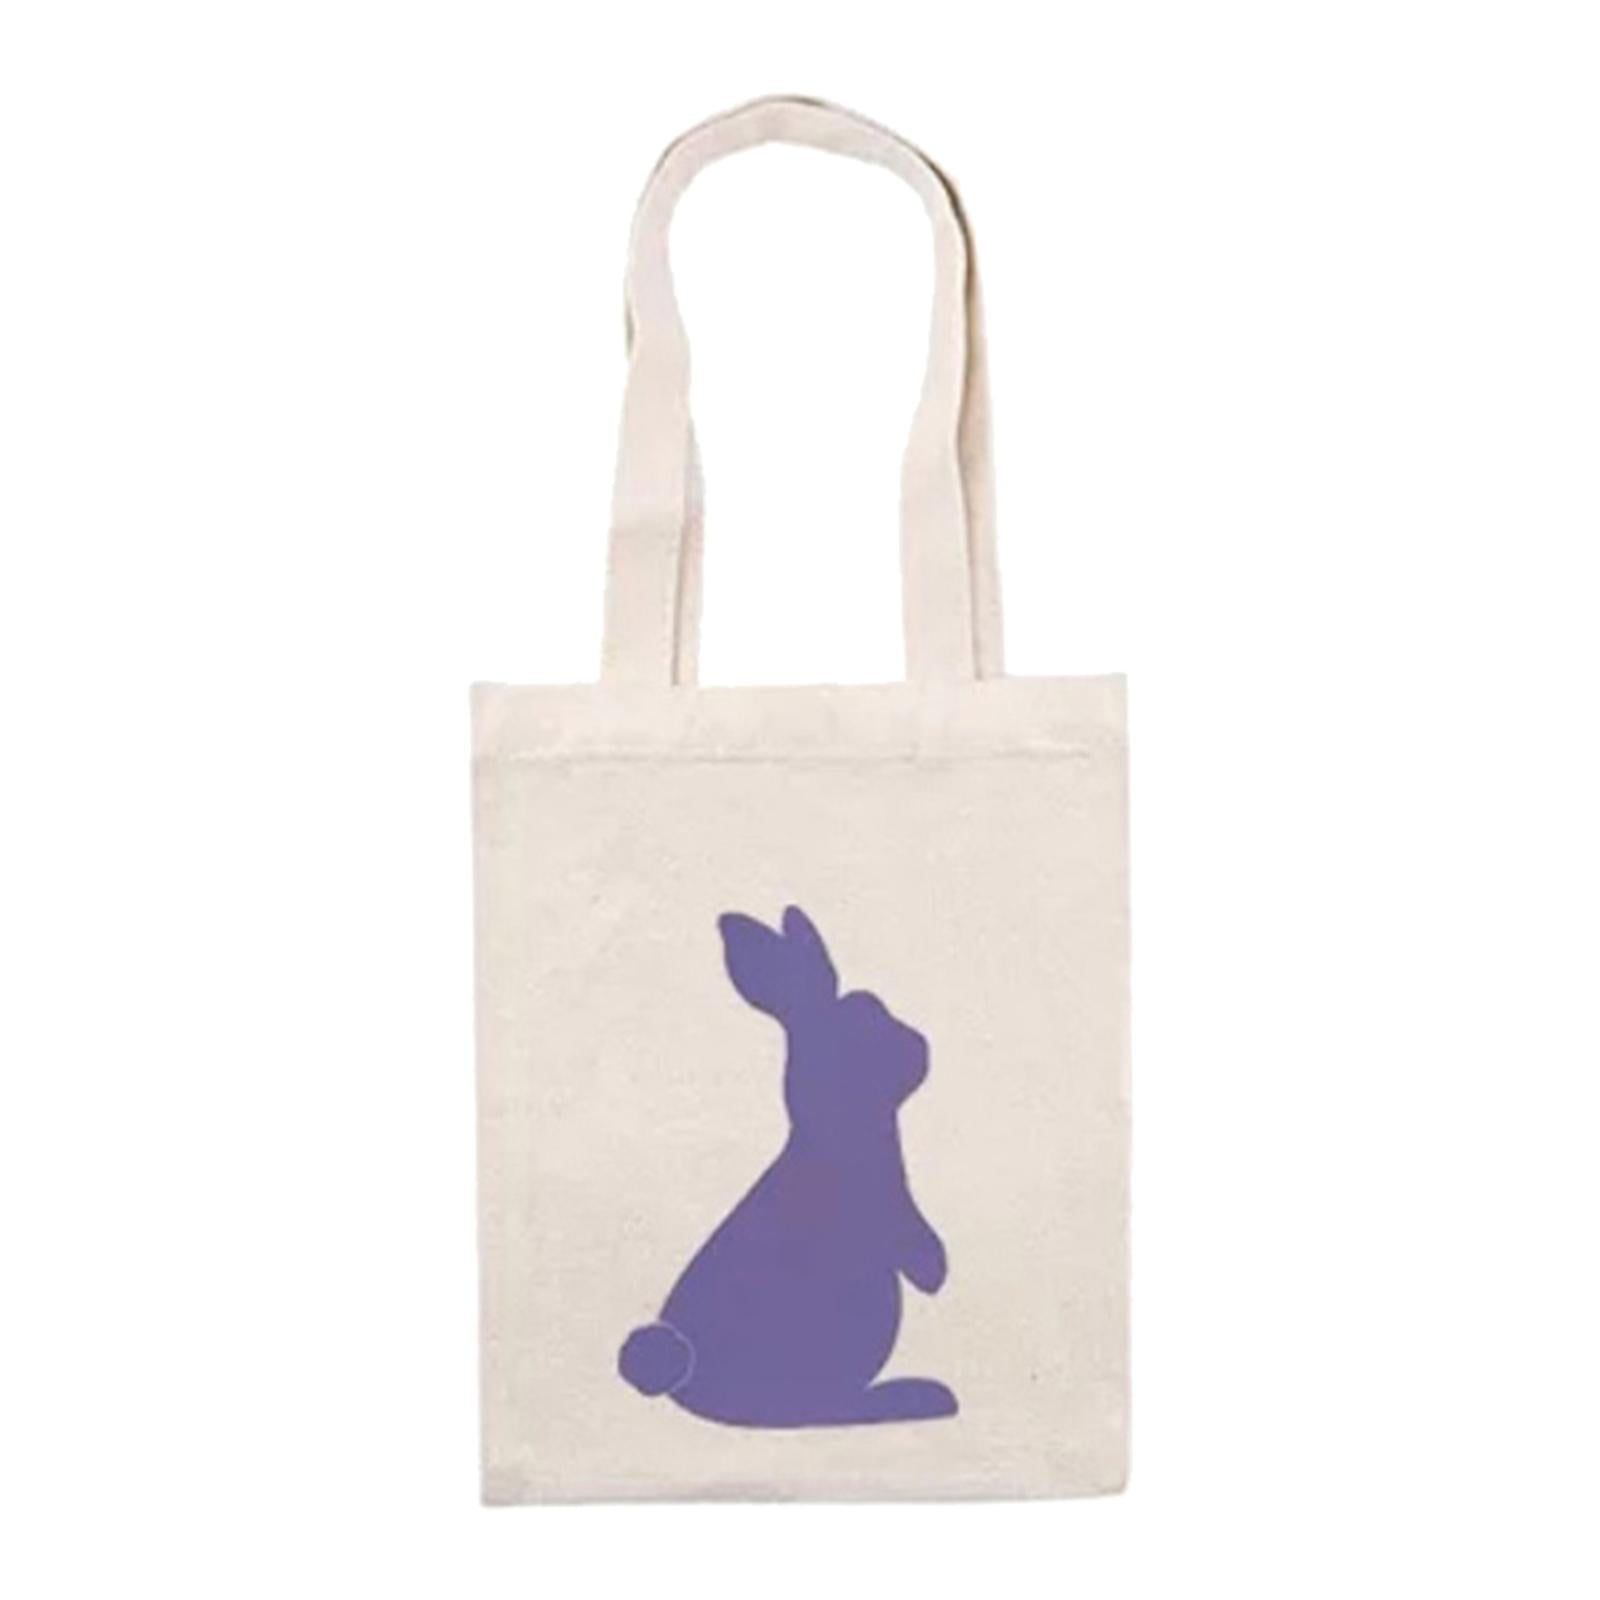 Non-Woven Tote Bag Easter Basket Bags Happy Easter Rabbit Bags with Handles 6 Pack Easter Gift Bags Large Easter Bags with Handles Trick Bags Easter Kids Party Favor Supplies Easter Egg Bunny Treat Bags for Kids 